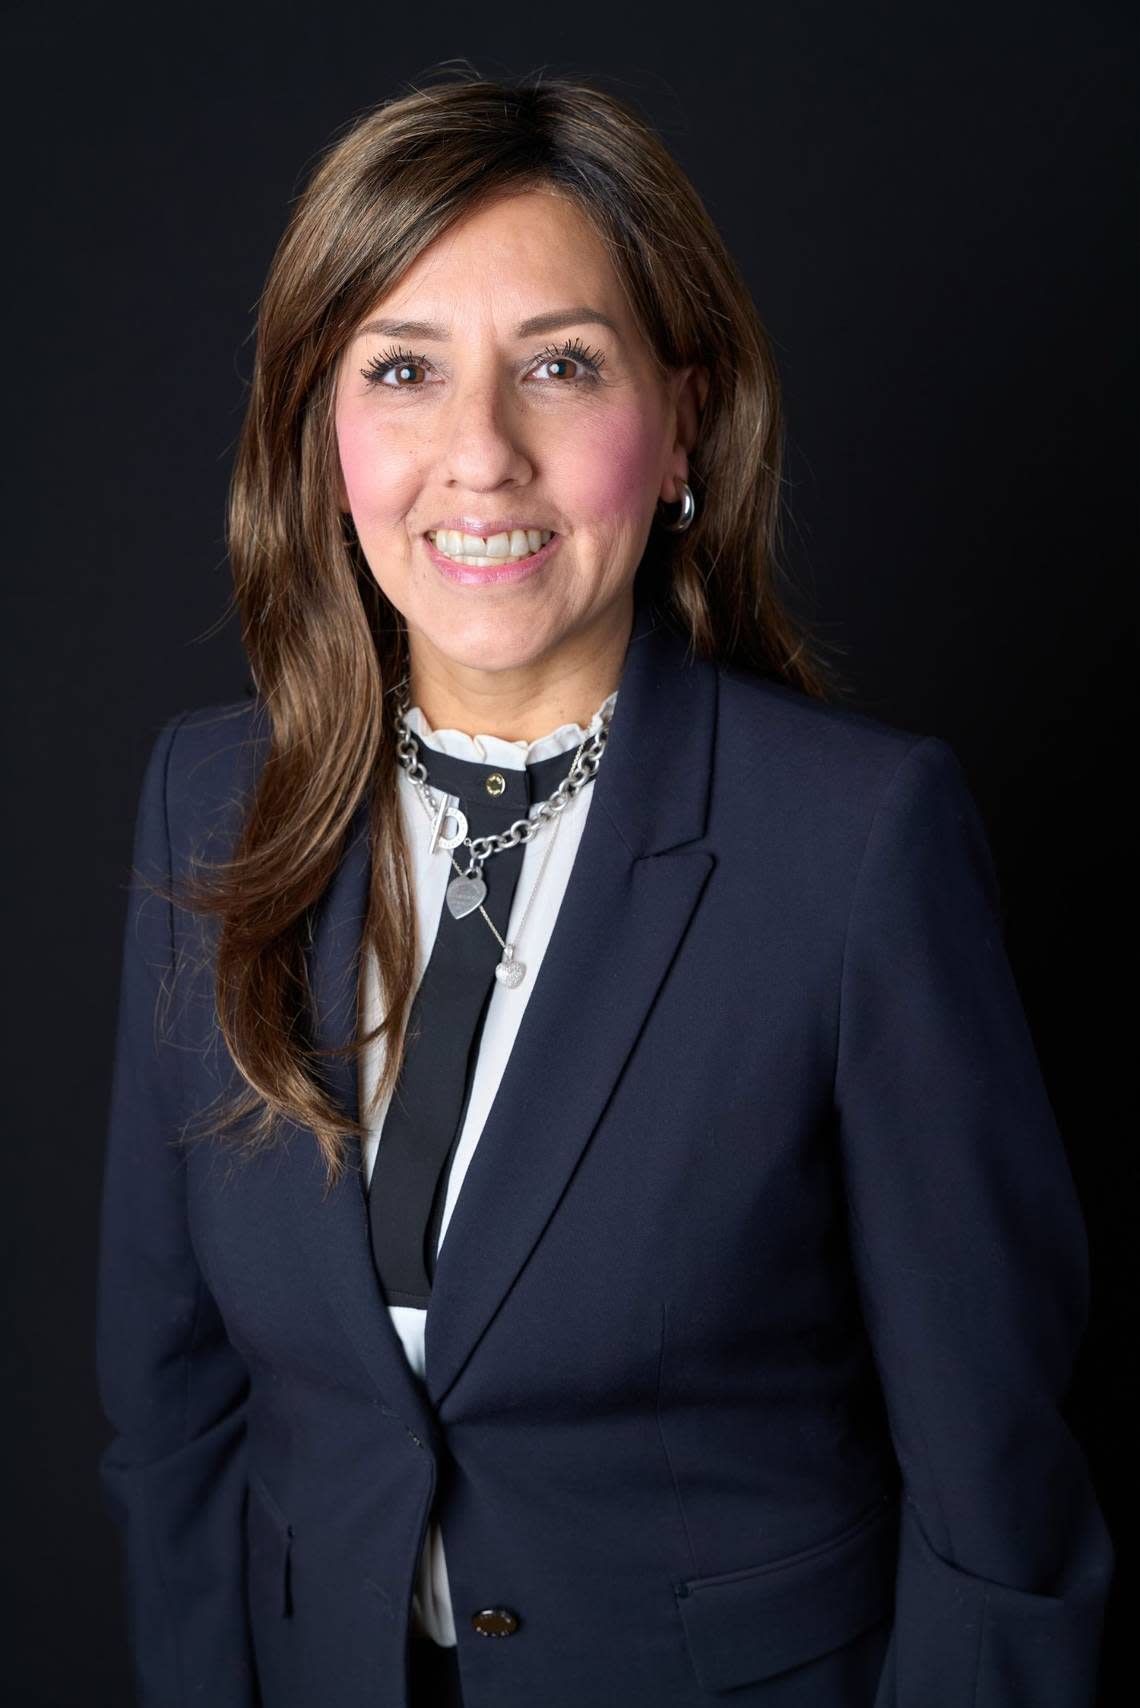 Rosario Rodriguez, mayor of Folsom in 2023 and a business owner, is one of three candidates running to replace Sue Frost to represent District 4 on the Sacramento County Board of Supervisors.